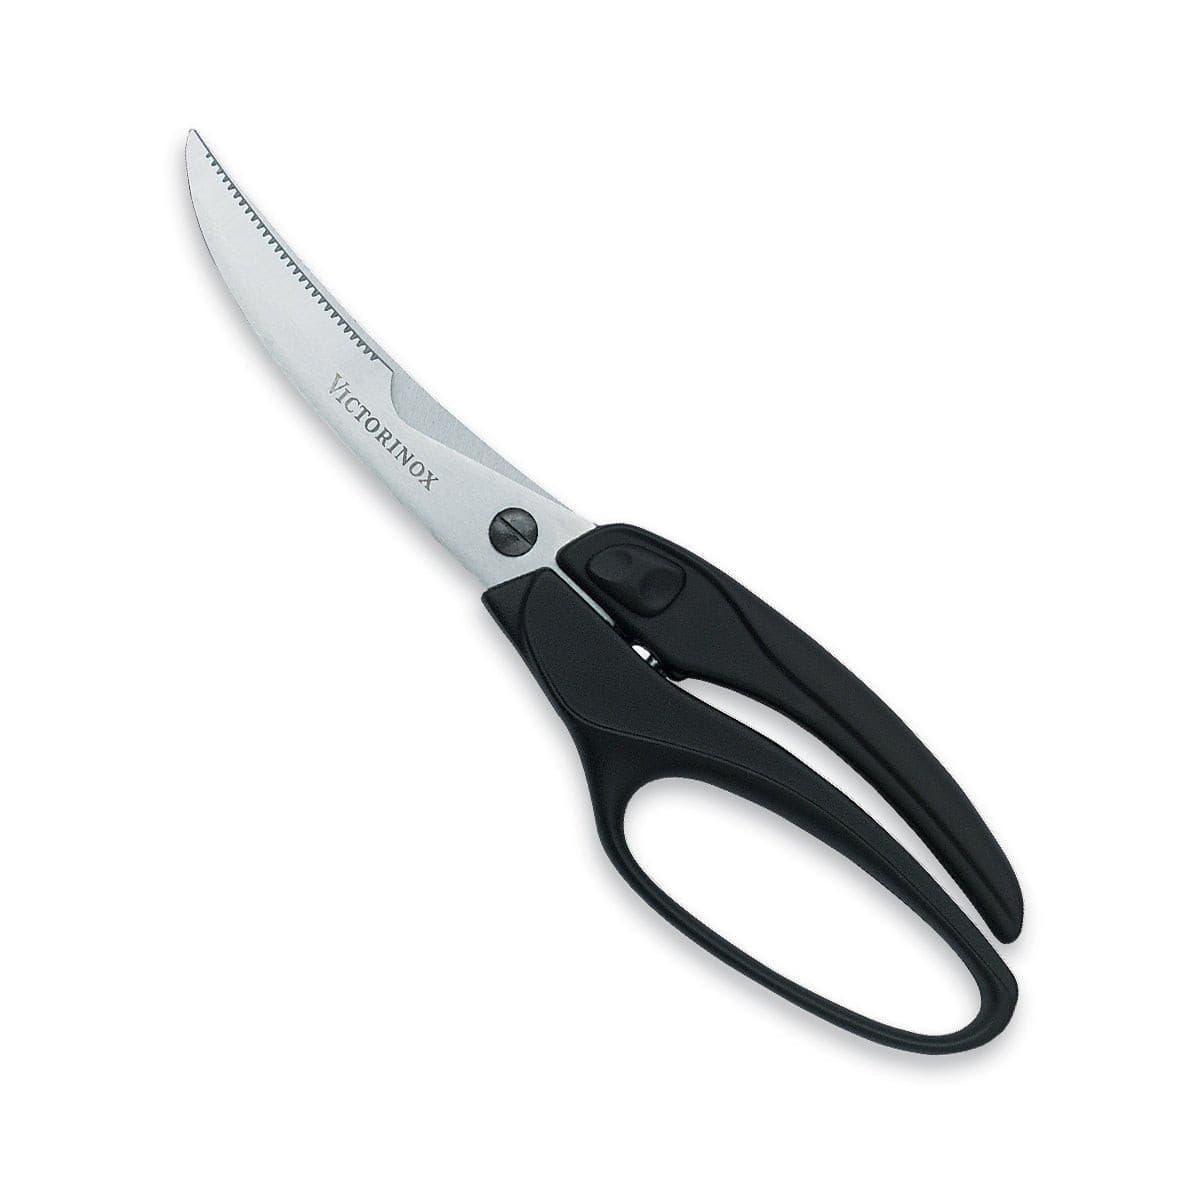 Victorinox Poultry Shears, Stainless Blades, Enclosed Bottom - Knife Store